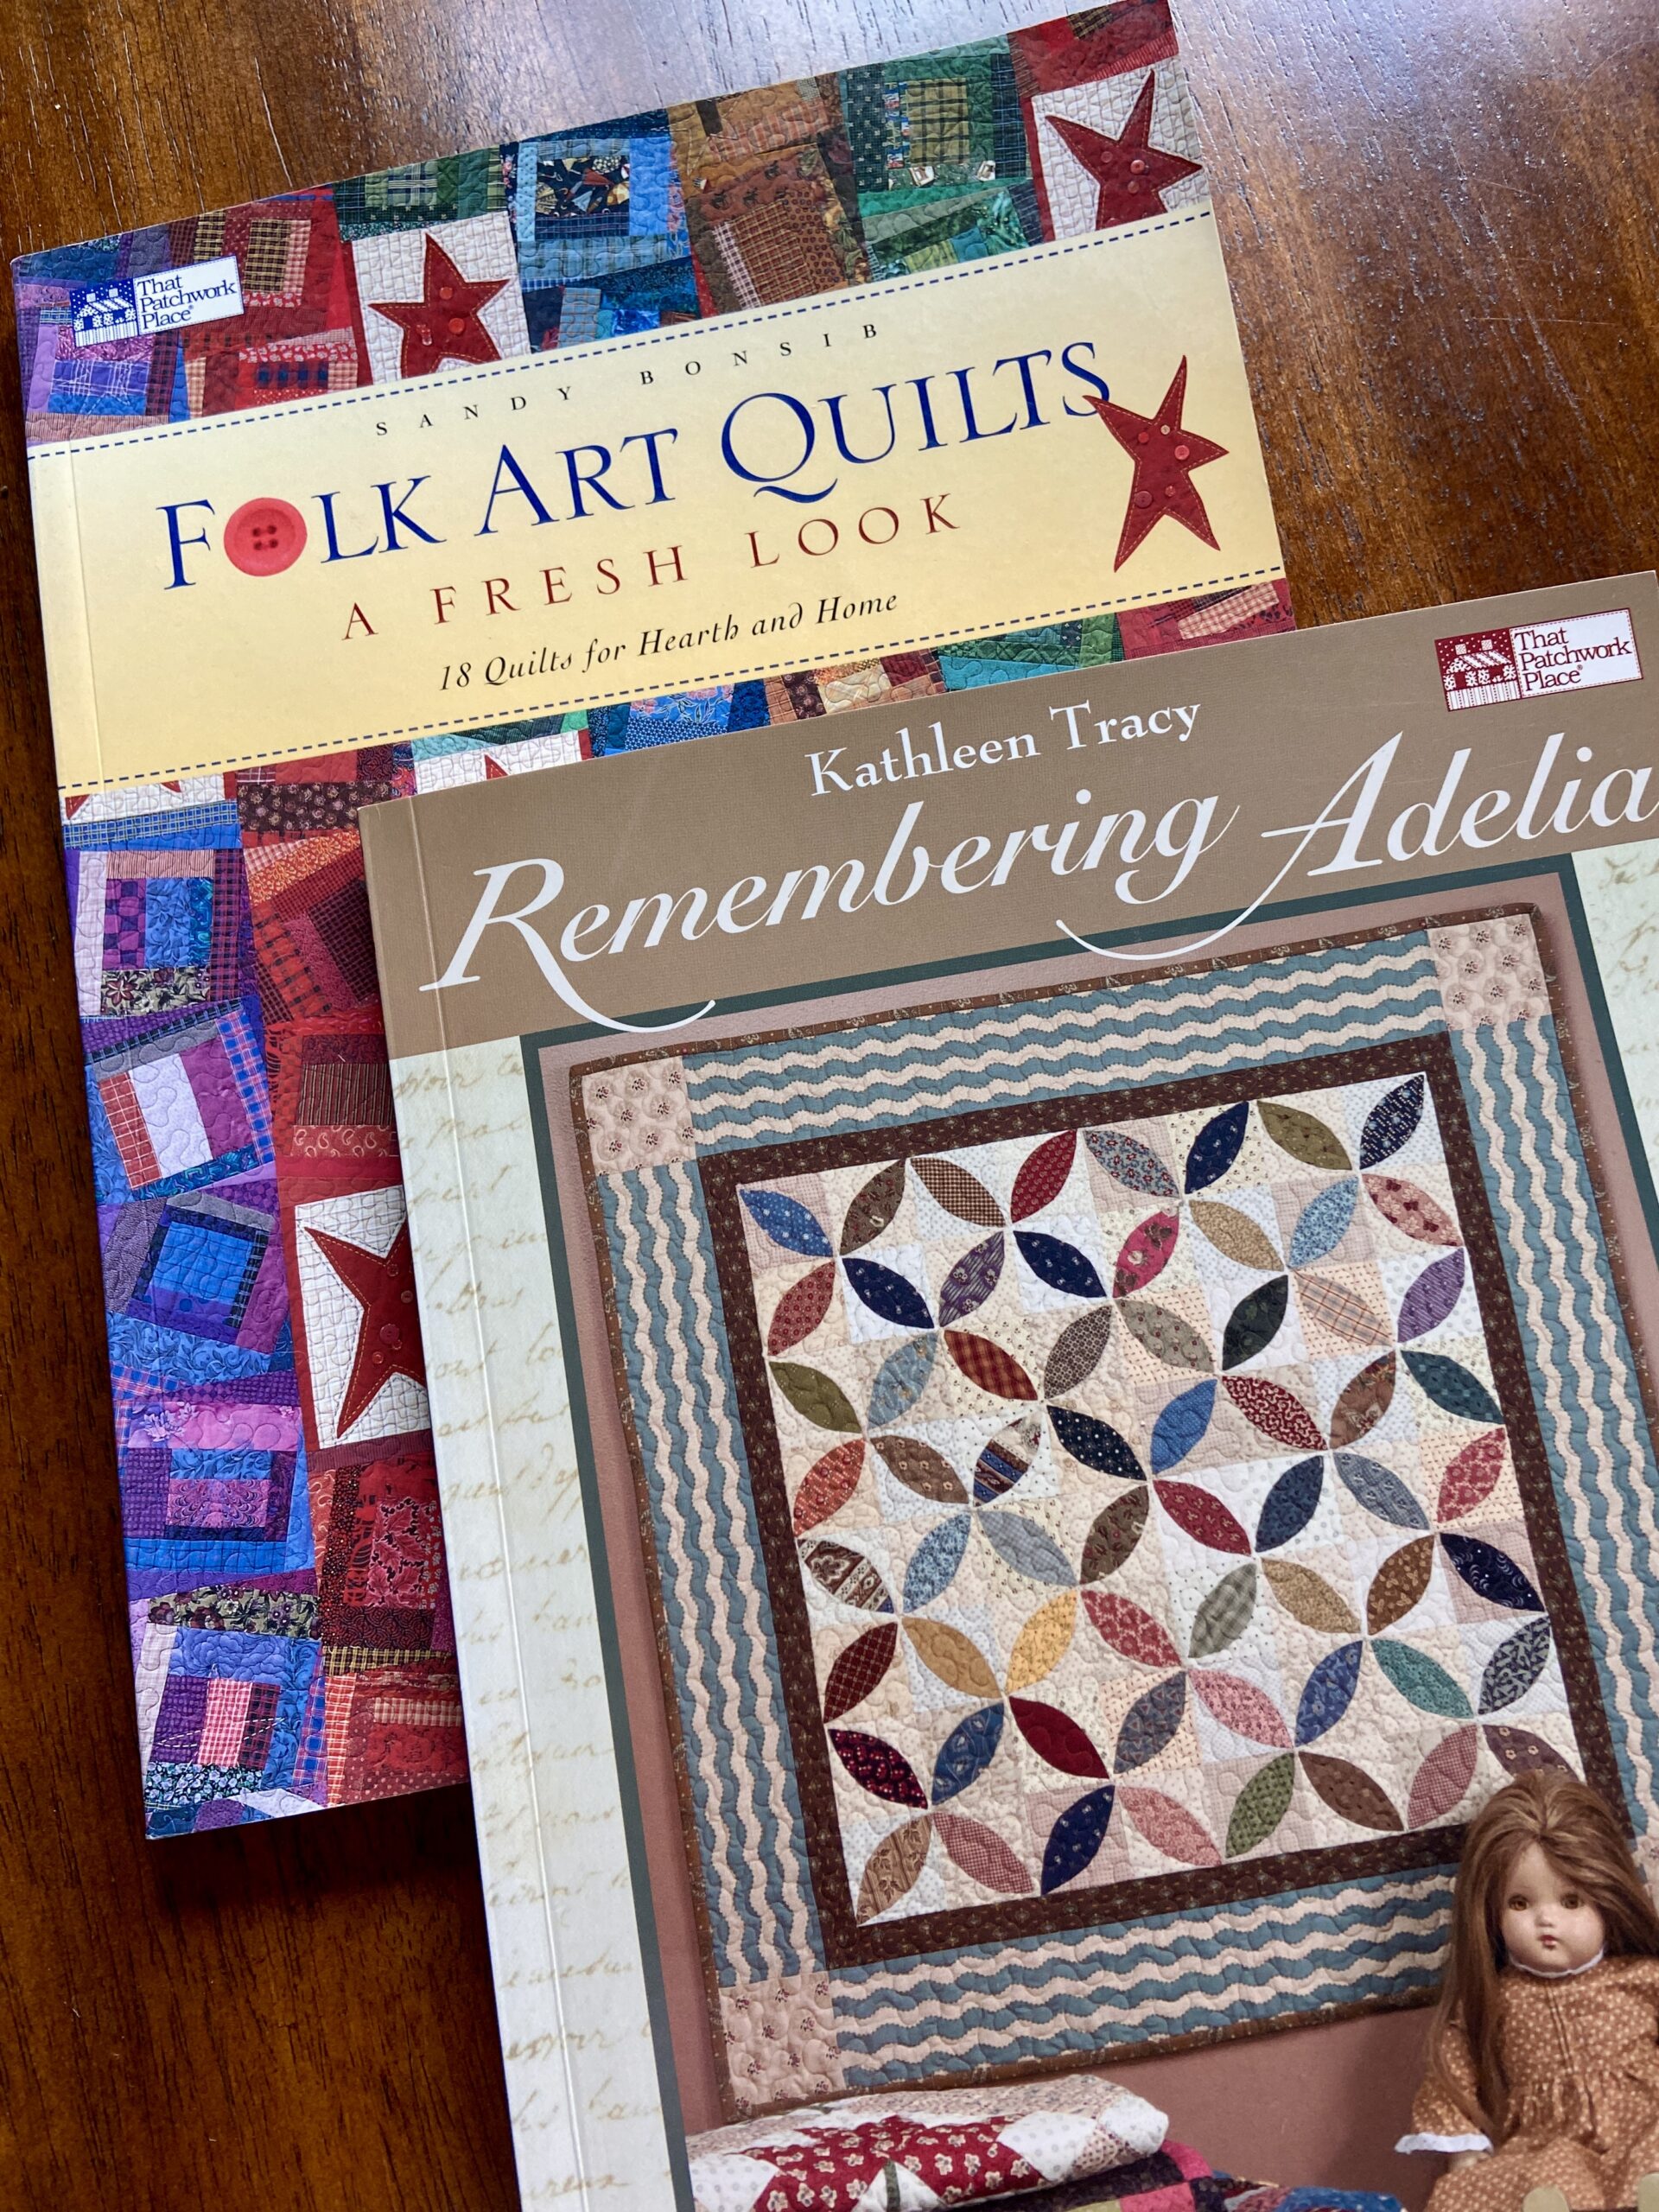 Pattern Box Decorative Floral Free Motion Quilting Kit - Folk Art on G –  The Quilters' Guild Shop